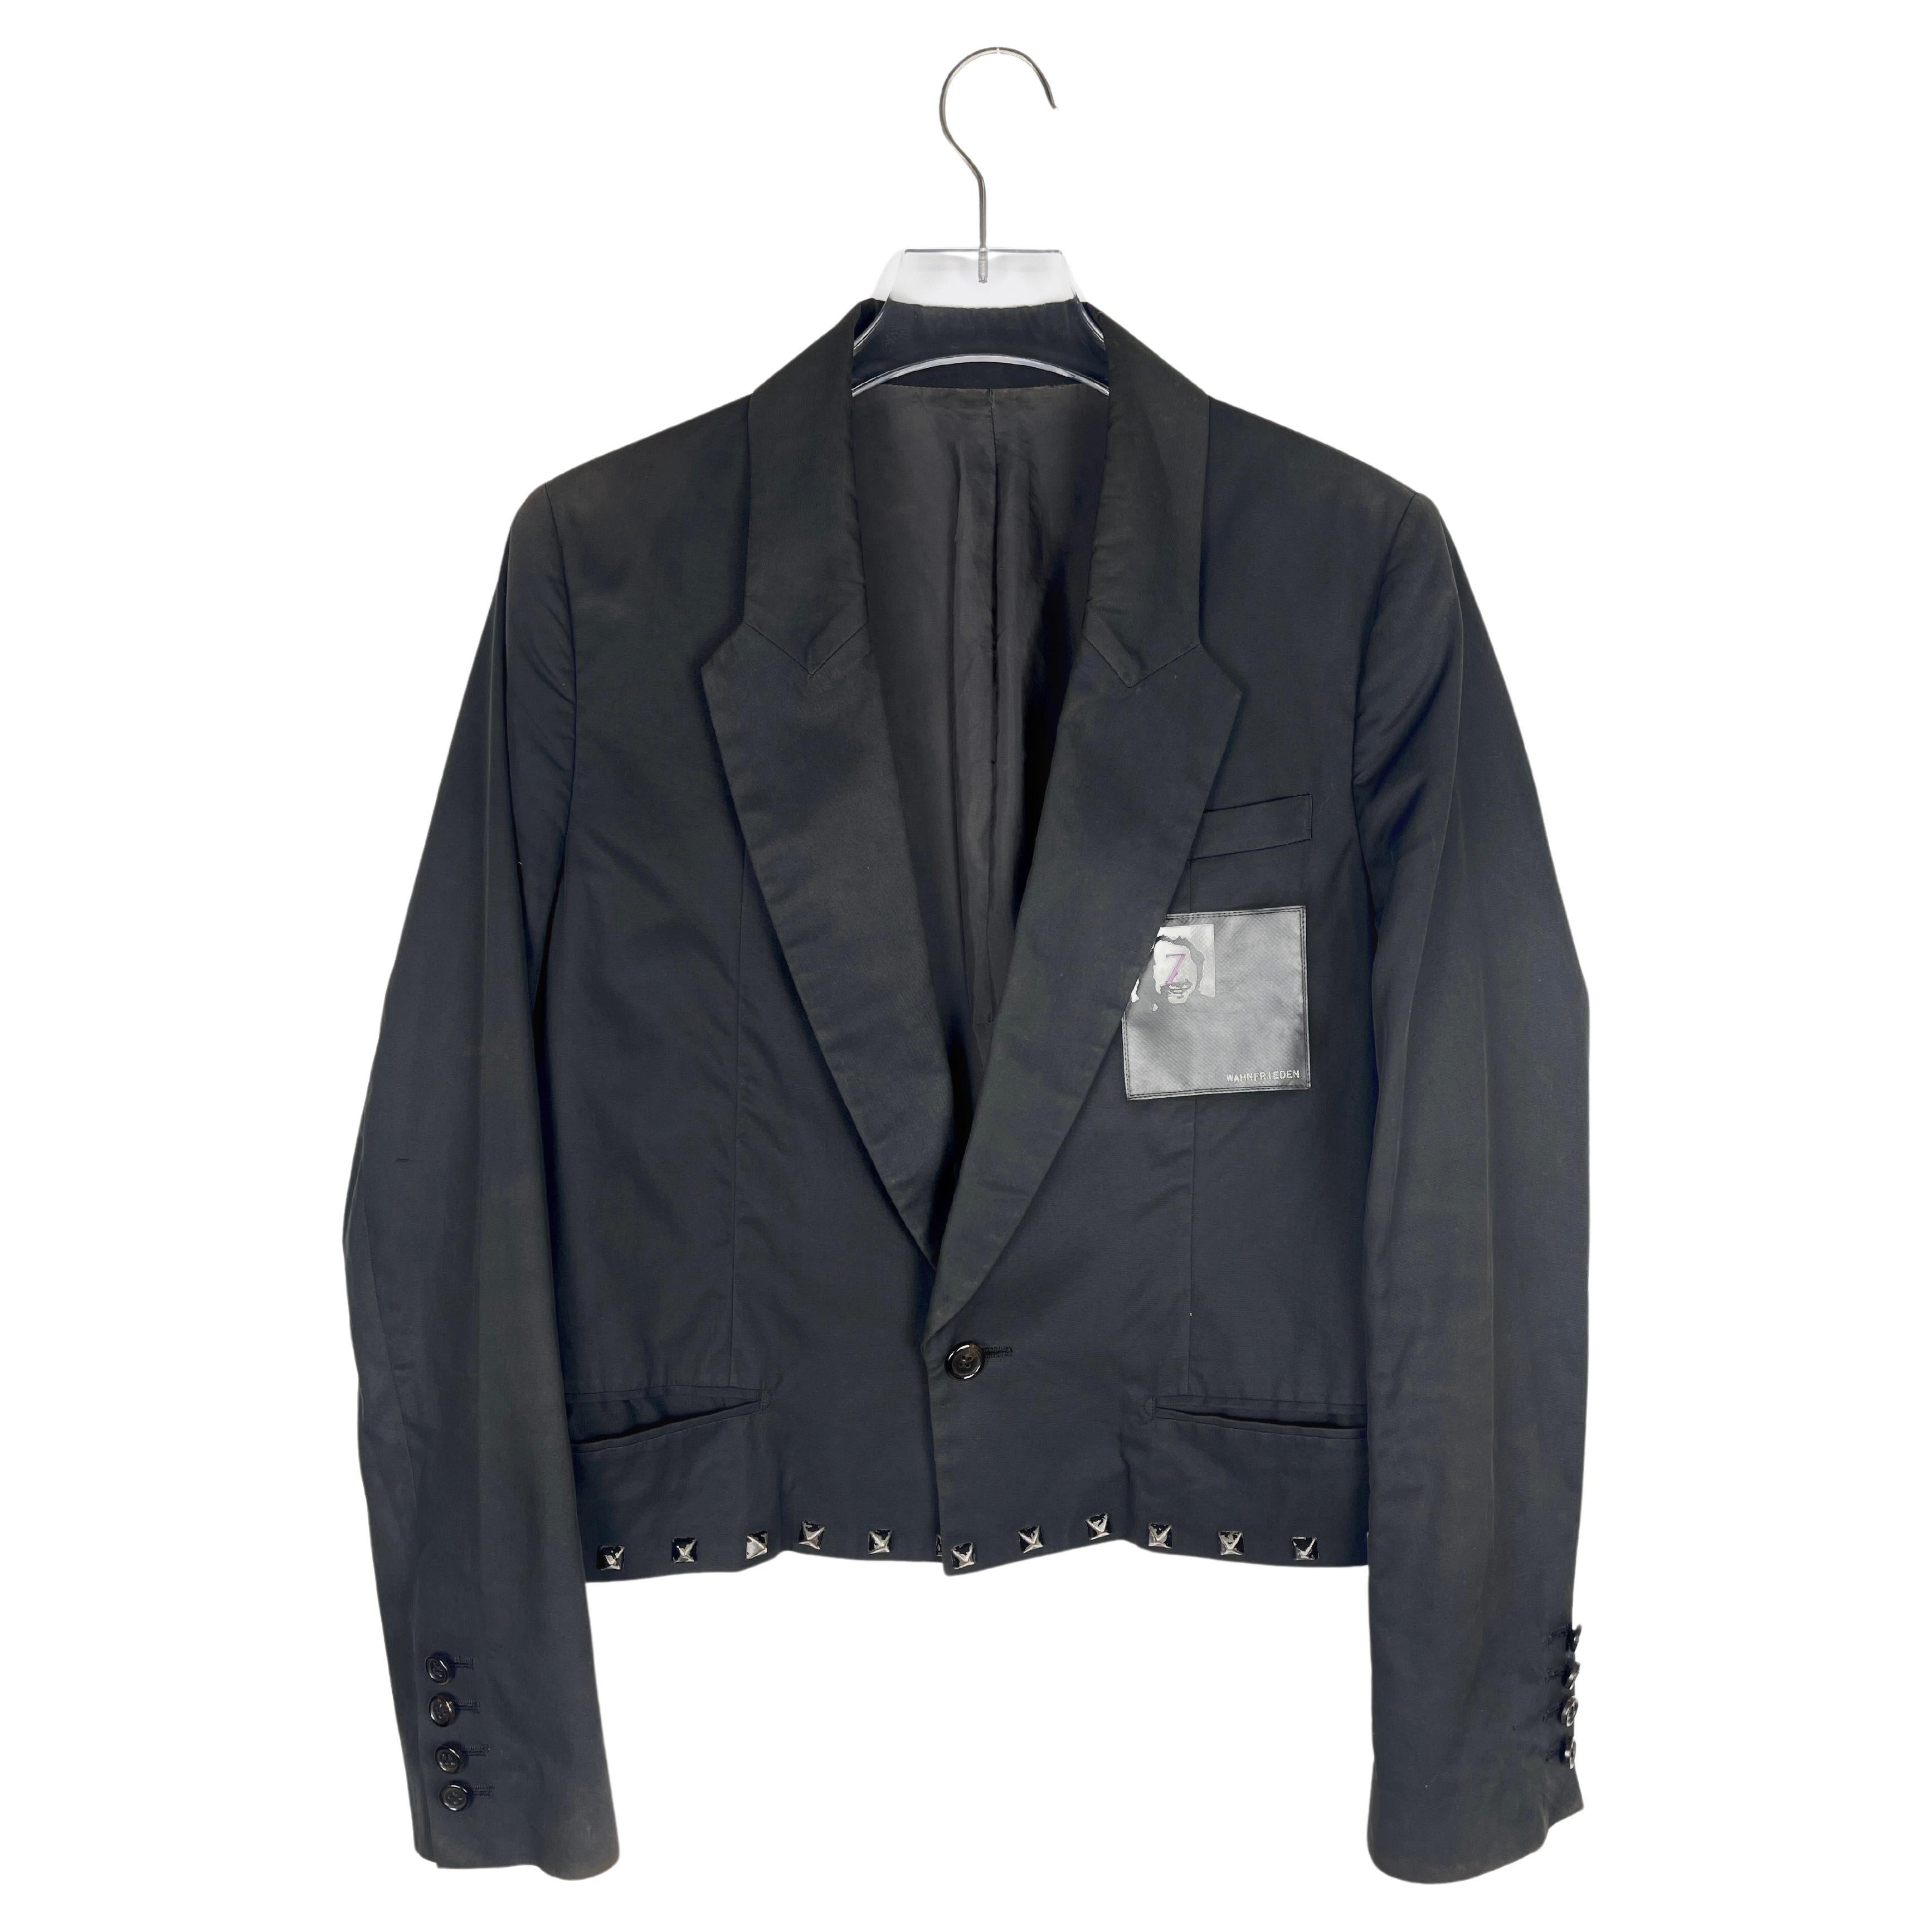 Undercover S/S2006 Zamiang Blazer For Sale